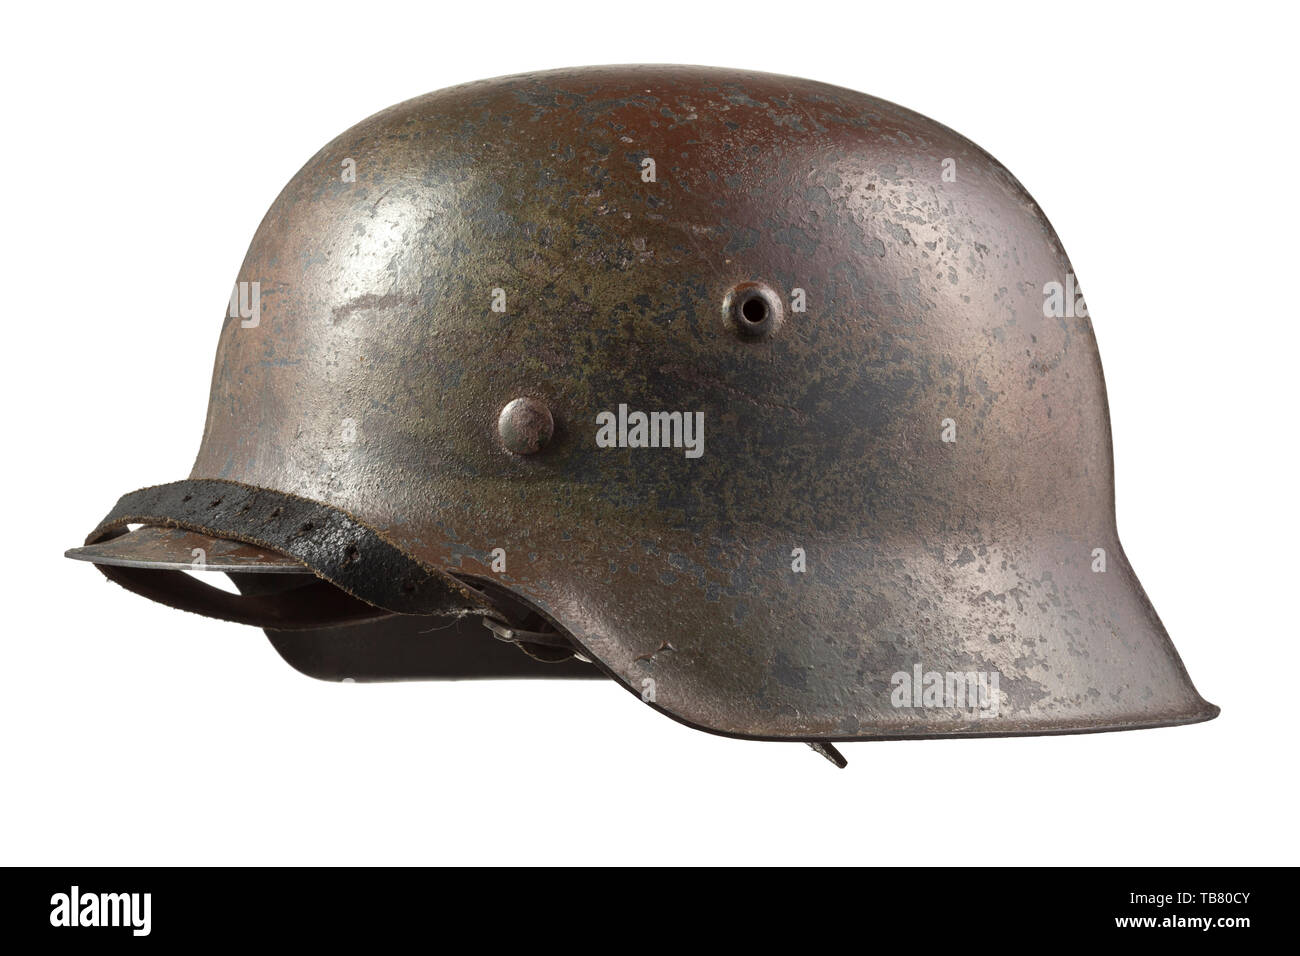 A steel helmet M 42 in 'Normandy' camouflage, The skull with maker's stamping 'hkp64' (tr. Saxon Enamel and Sheet Metal Factory), multi-coloured camouflage paint applied over the original field-grey paint. The inner liner (with chinstrap) and skull with handwritten wearer designation 'Köhler'. historic, historical 20th century, Editorial-Use-Only Stock Photo